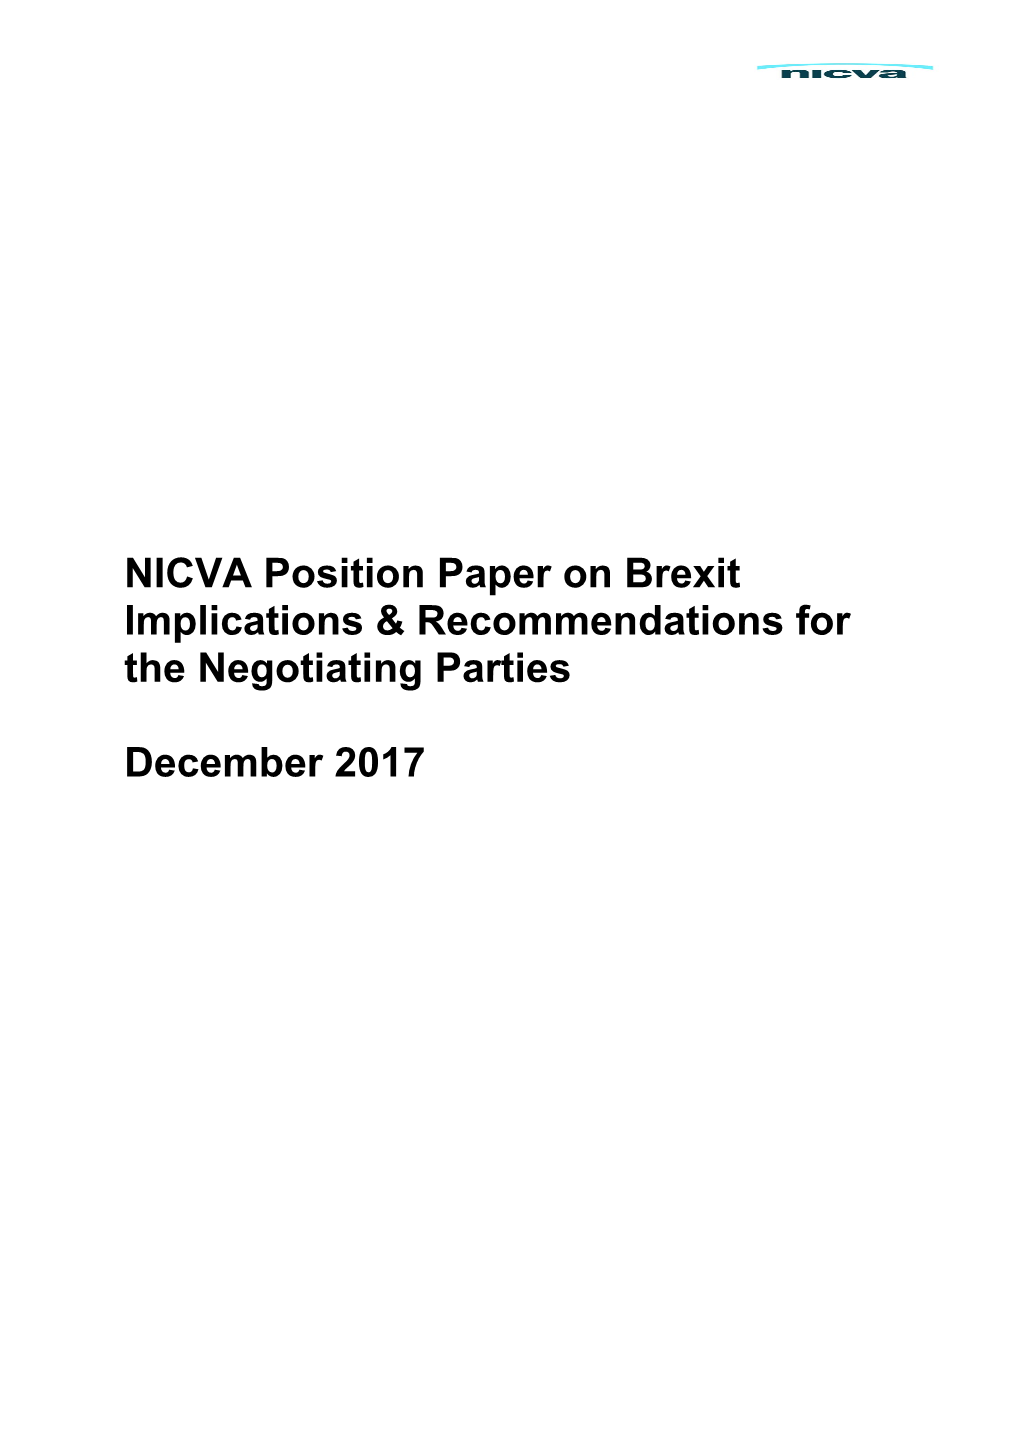 NICVA Position Paper on Brexit Implications & Recommendations for the Negotiating Parties